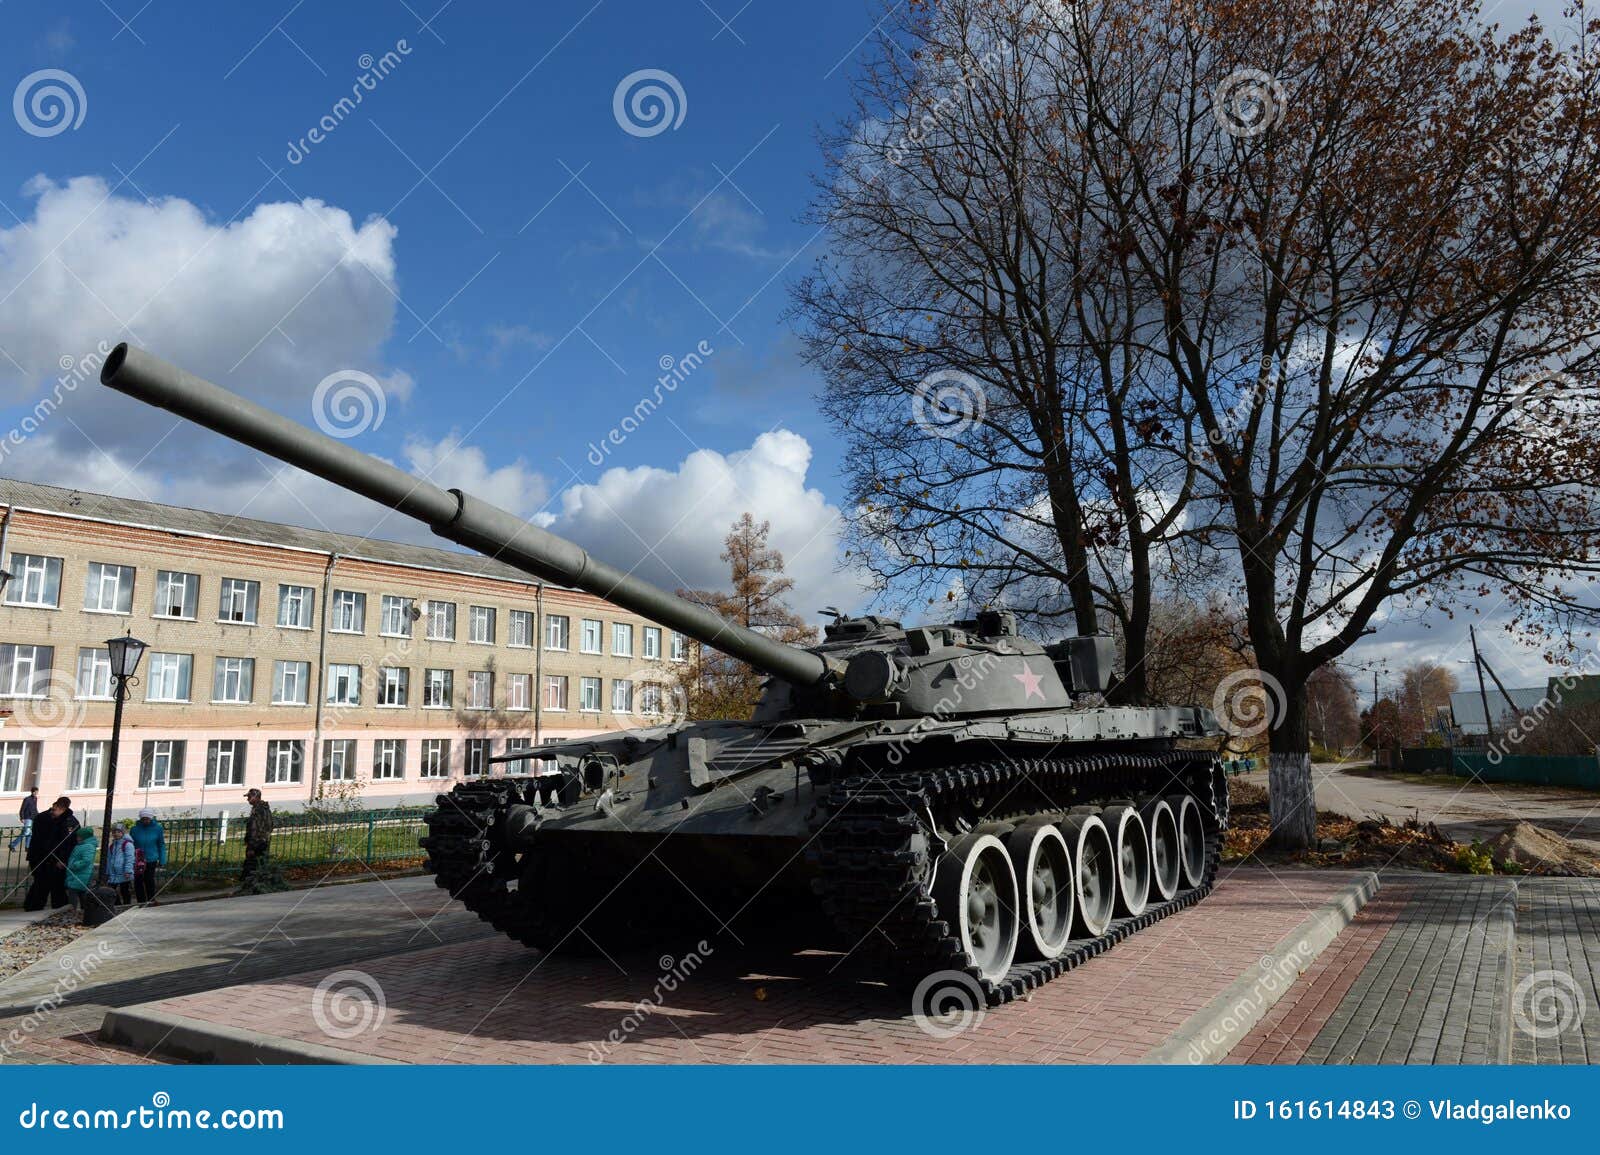 T 72 Tank At The Memorial Complex In The City Of Ryazhsk Ryazan Region Editorial Stock Photo Image Of Architecture Armored